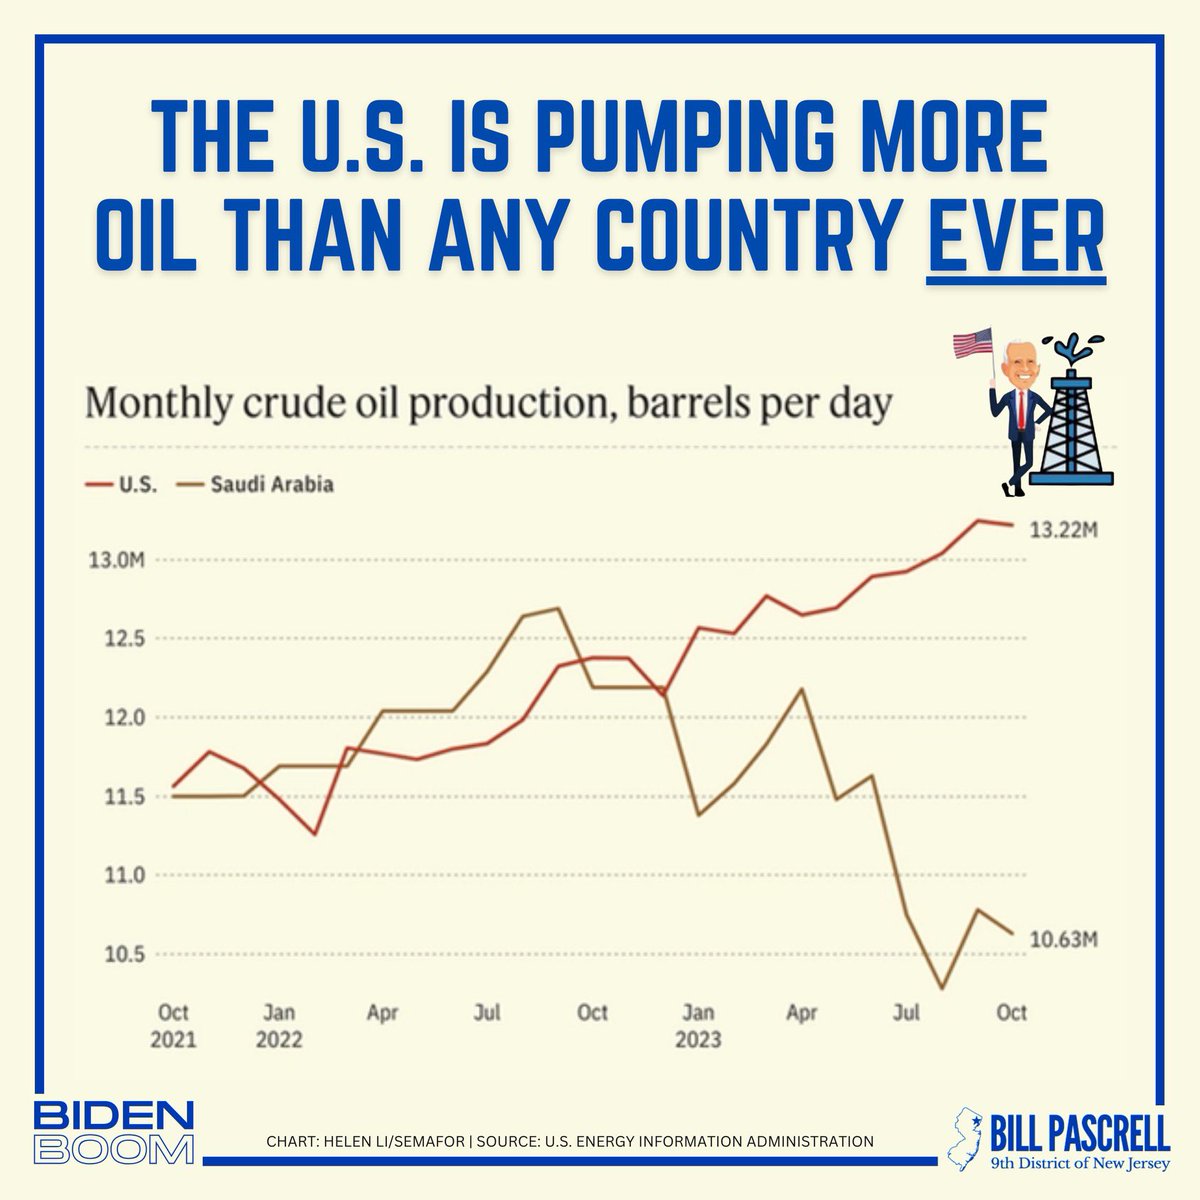 @jackikotkiewicz Not where I live. If you are angry about the price of gas & consumer goods ask Trump why he had conversations with MBS to cut oil production - to help him get elected & ask CEO's about record profits. twitter.com/DarrigoMelanie…